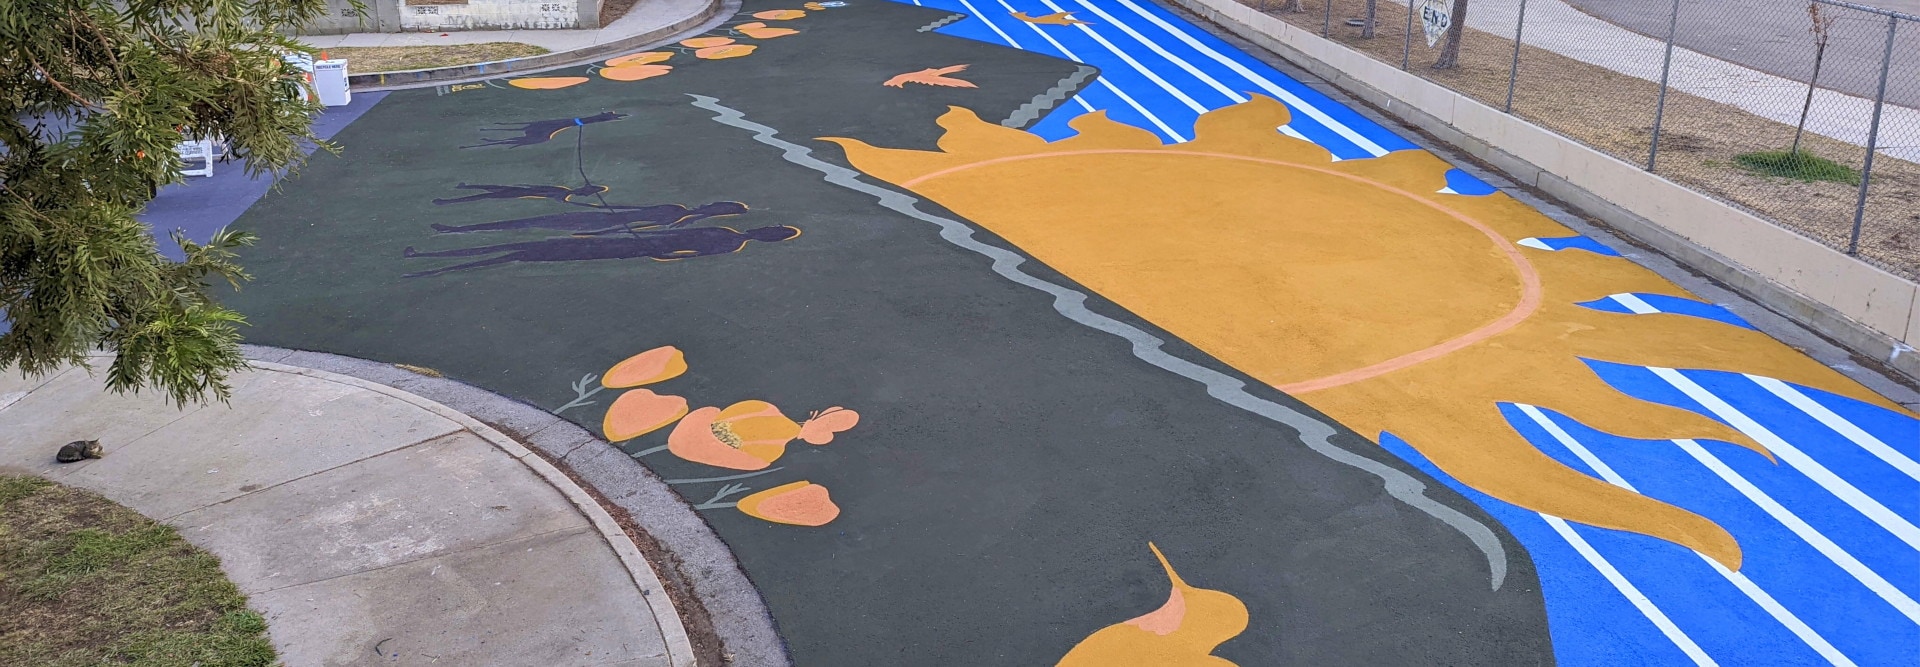 Newly designed school playground using StreetBond coating, helping cool the asphalt.